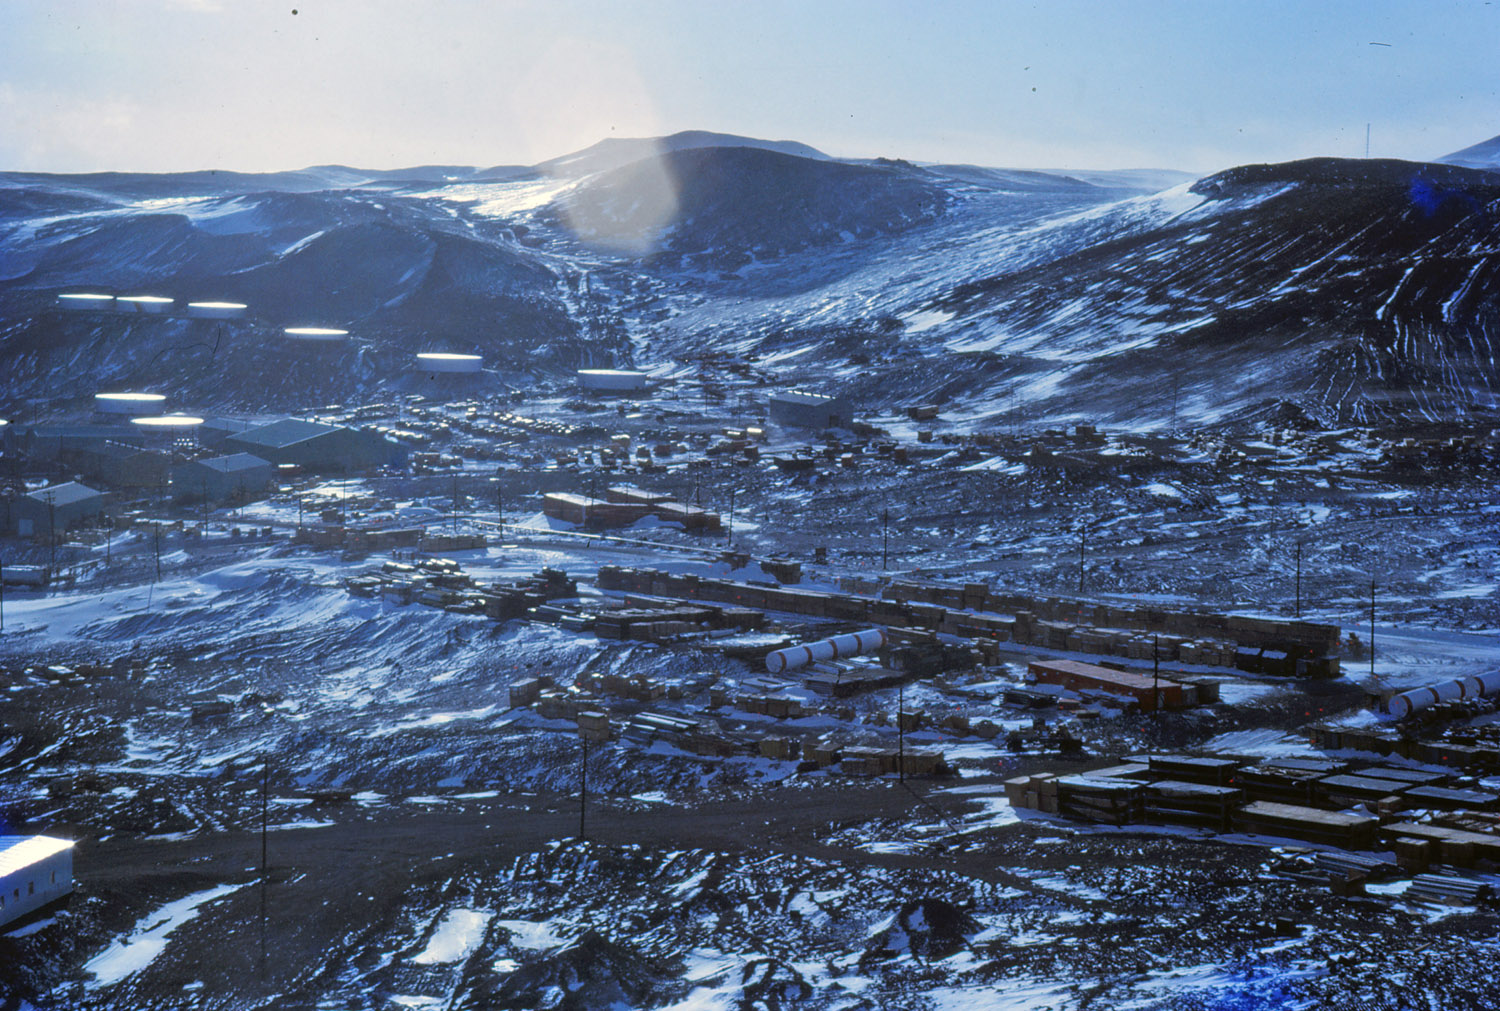 McMurdo Station - Looking Down the Hut Point Peninsula